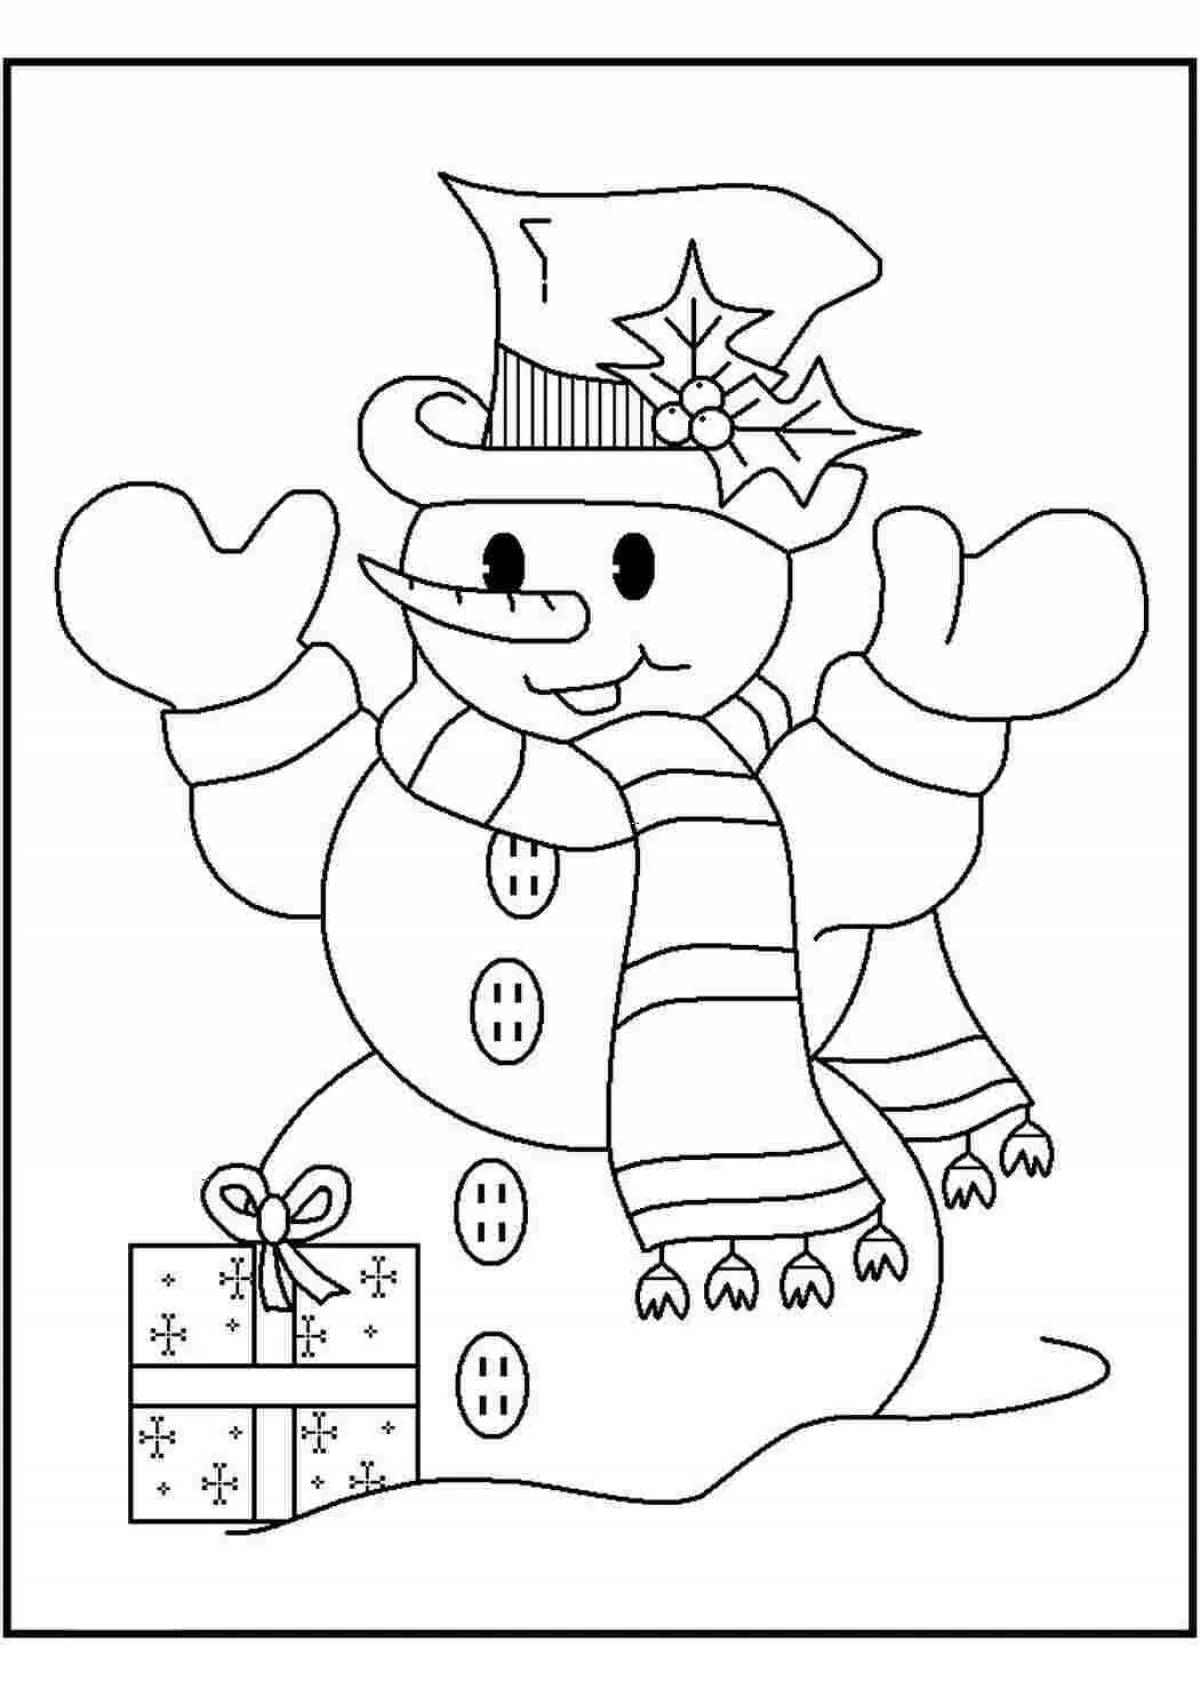 Coloring card noble snowman